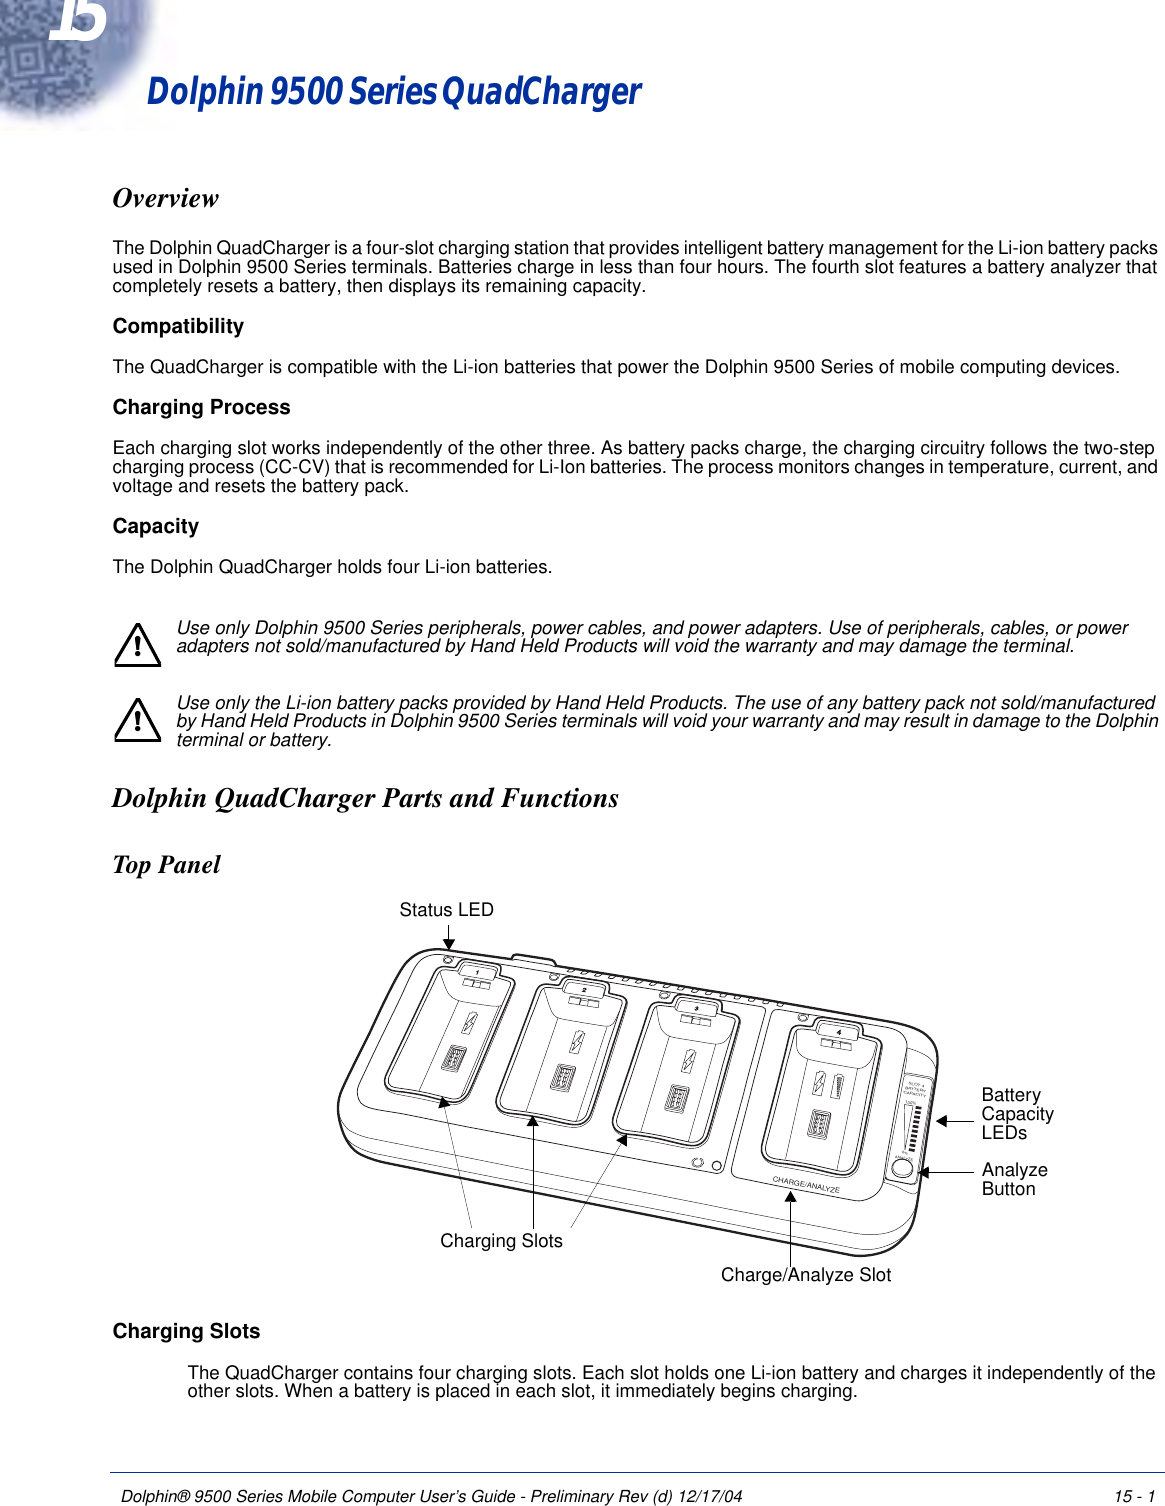 Dolphin® 9500 Series Mobile Computer User’s Guide - Preliminary Rev (d) 12/17/04 15 - 115Dolphin 9500 Series QuadChargerOverviewThe Dolphin QuadCharger is a four-slot charging station that provides intelligent battery management for the Li-ion battery packs used in Dolphin 9500 Series terminals. Batteries charge in less than four hours. The fourth slot features a battery analyzer that completely resets a battery, then displays its remaining capacity.CompatibilityThe QuadCharger is compatible with the Li-ion batteries that power the Dolphin 9500 Series of mobile computing devices.Charging ProcessEach charging slot works independently of the other three. As battery packs charge, the charging circuitry follows the two-step charging process (CC-CV) that is recommended for Li-Ion batteries. The process monitors changes in temperature, current, and voltage and resets the battery pack.CapacityThe Dolphin QuadCharger holds four Li-ion batteries.Use only Dolphin 9500 Series peripherals, power cables, and power adapters. Use of peripherals, cables, or power adapters not sold/manufactured by Hand Held Products will void the warranty and may damage the terminal.Use only the Li-ion battery packs provided by Hand Held Products. The use of any battery pack not sold/manufactured by Hand Held Products in Dolphin 9500 Series terminals will void your warranty and may result in damage to the Dolphin terminal or battery.Dolphin QuadCharger Parts and FunctionsTop Panel Charging SlotsThe QuadCharger contains four charging slots. Each slot holds one Li-ion battery and charges it independently of the other slots. When a battery is placed in each slot, it immediately begins charging.   !!OSLOT 4BATTERYCAPACITY100%0%ANALYZECHARGE/ANALYZE1234Charging SlotsStatus LEDCharge/Analyze SlotBattery Capacity LEDsAnalyze Button